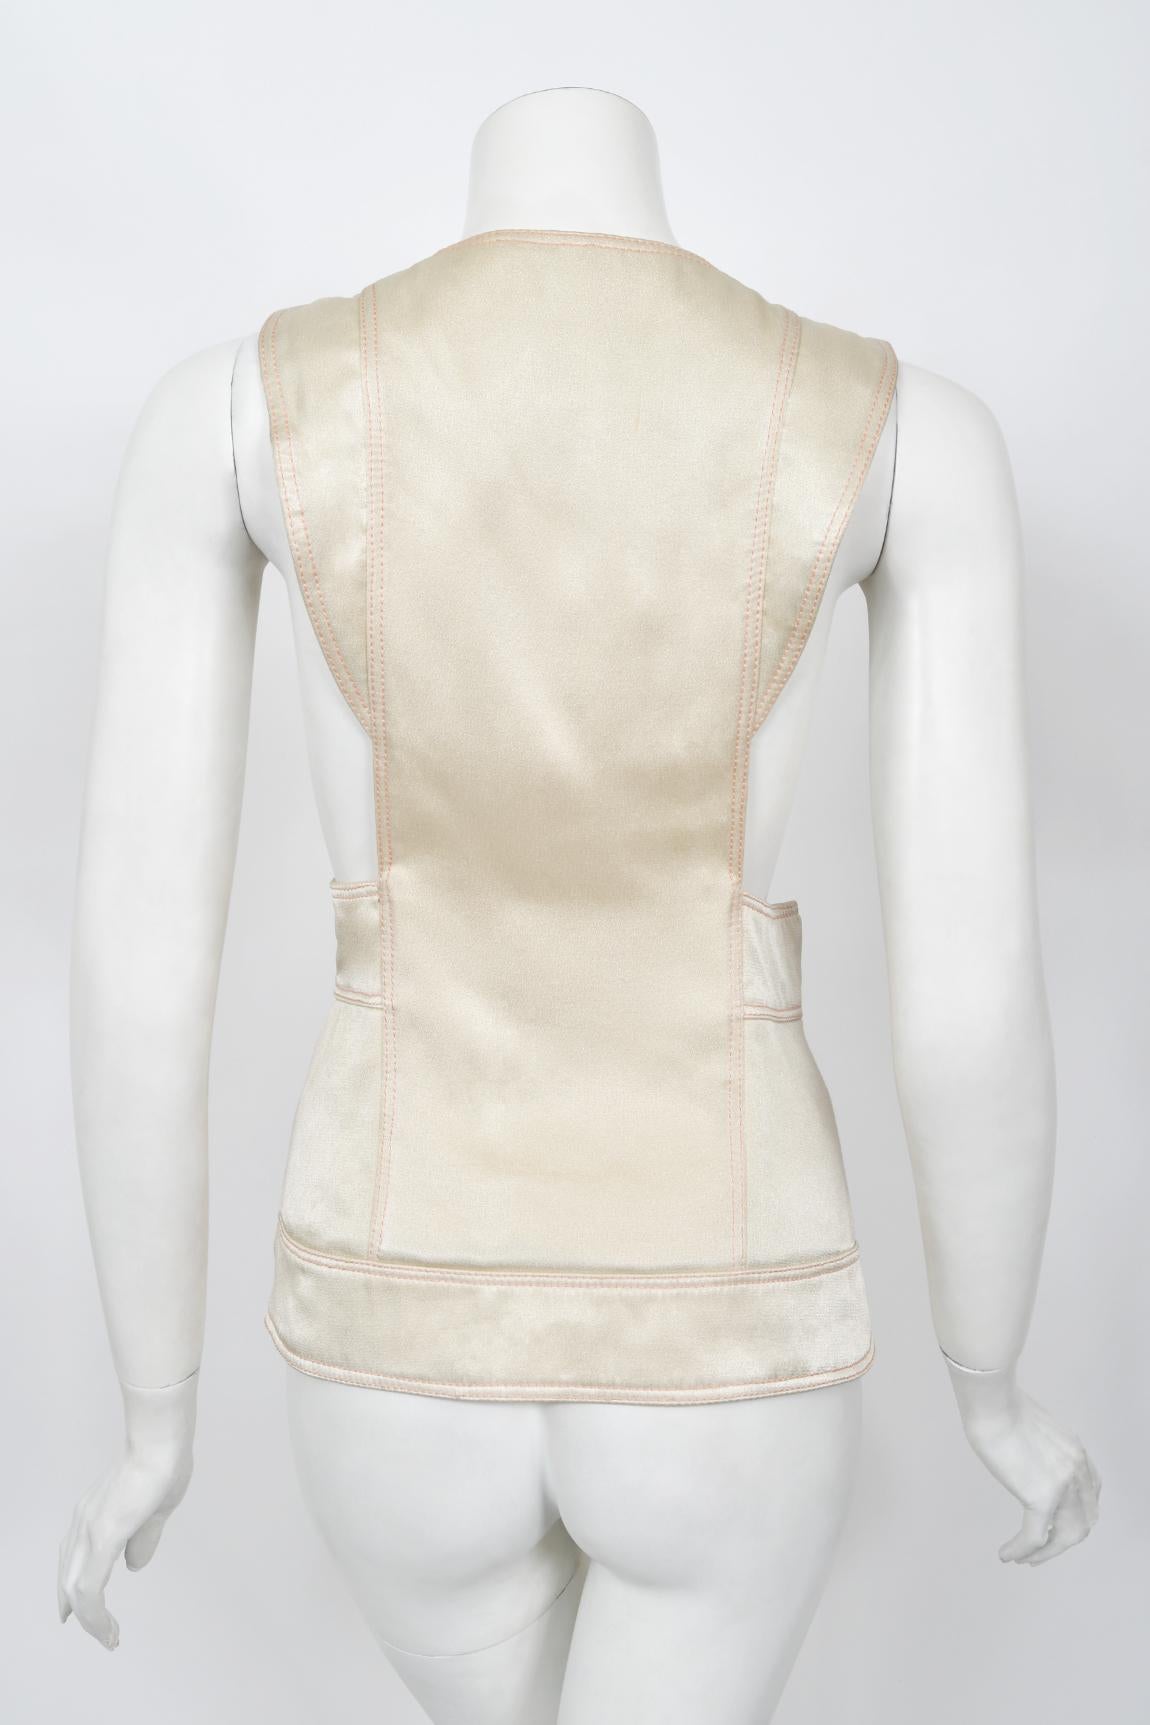 Vintage 1970's Bill Gibb Couture Embroidered Satin Mutton-Sleeve Jacket & Vest  For Sale 6